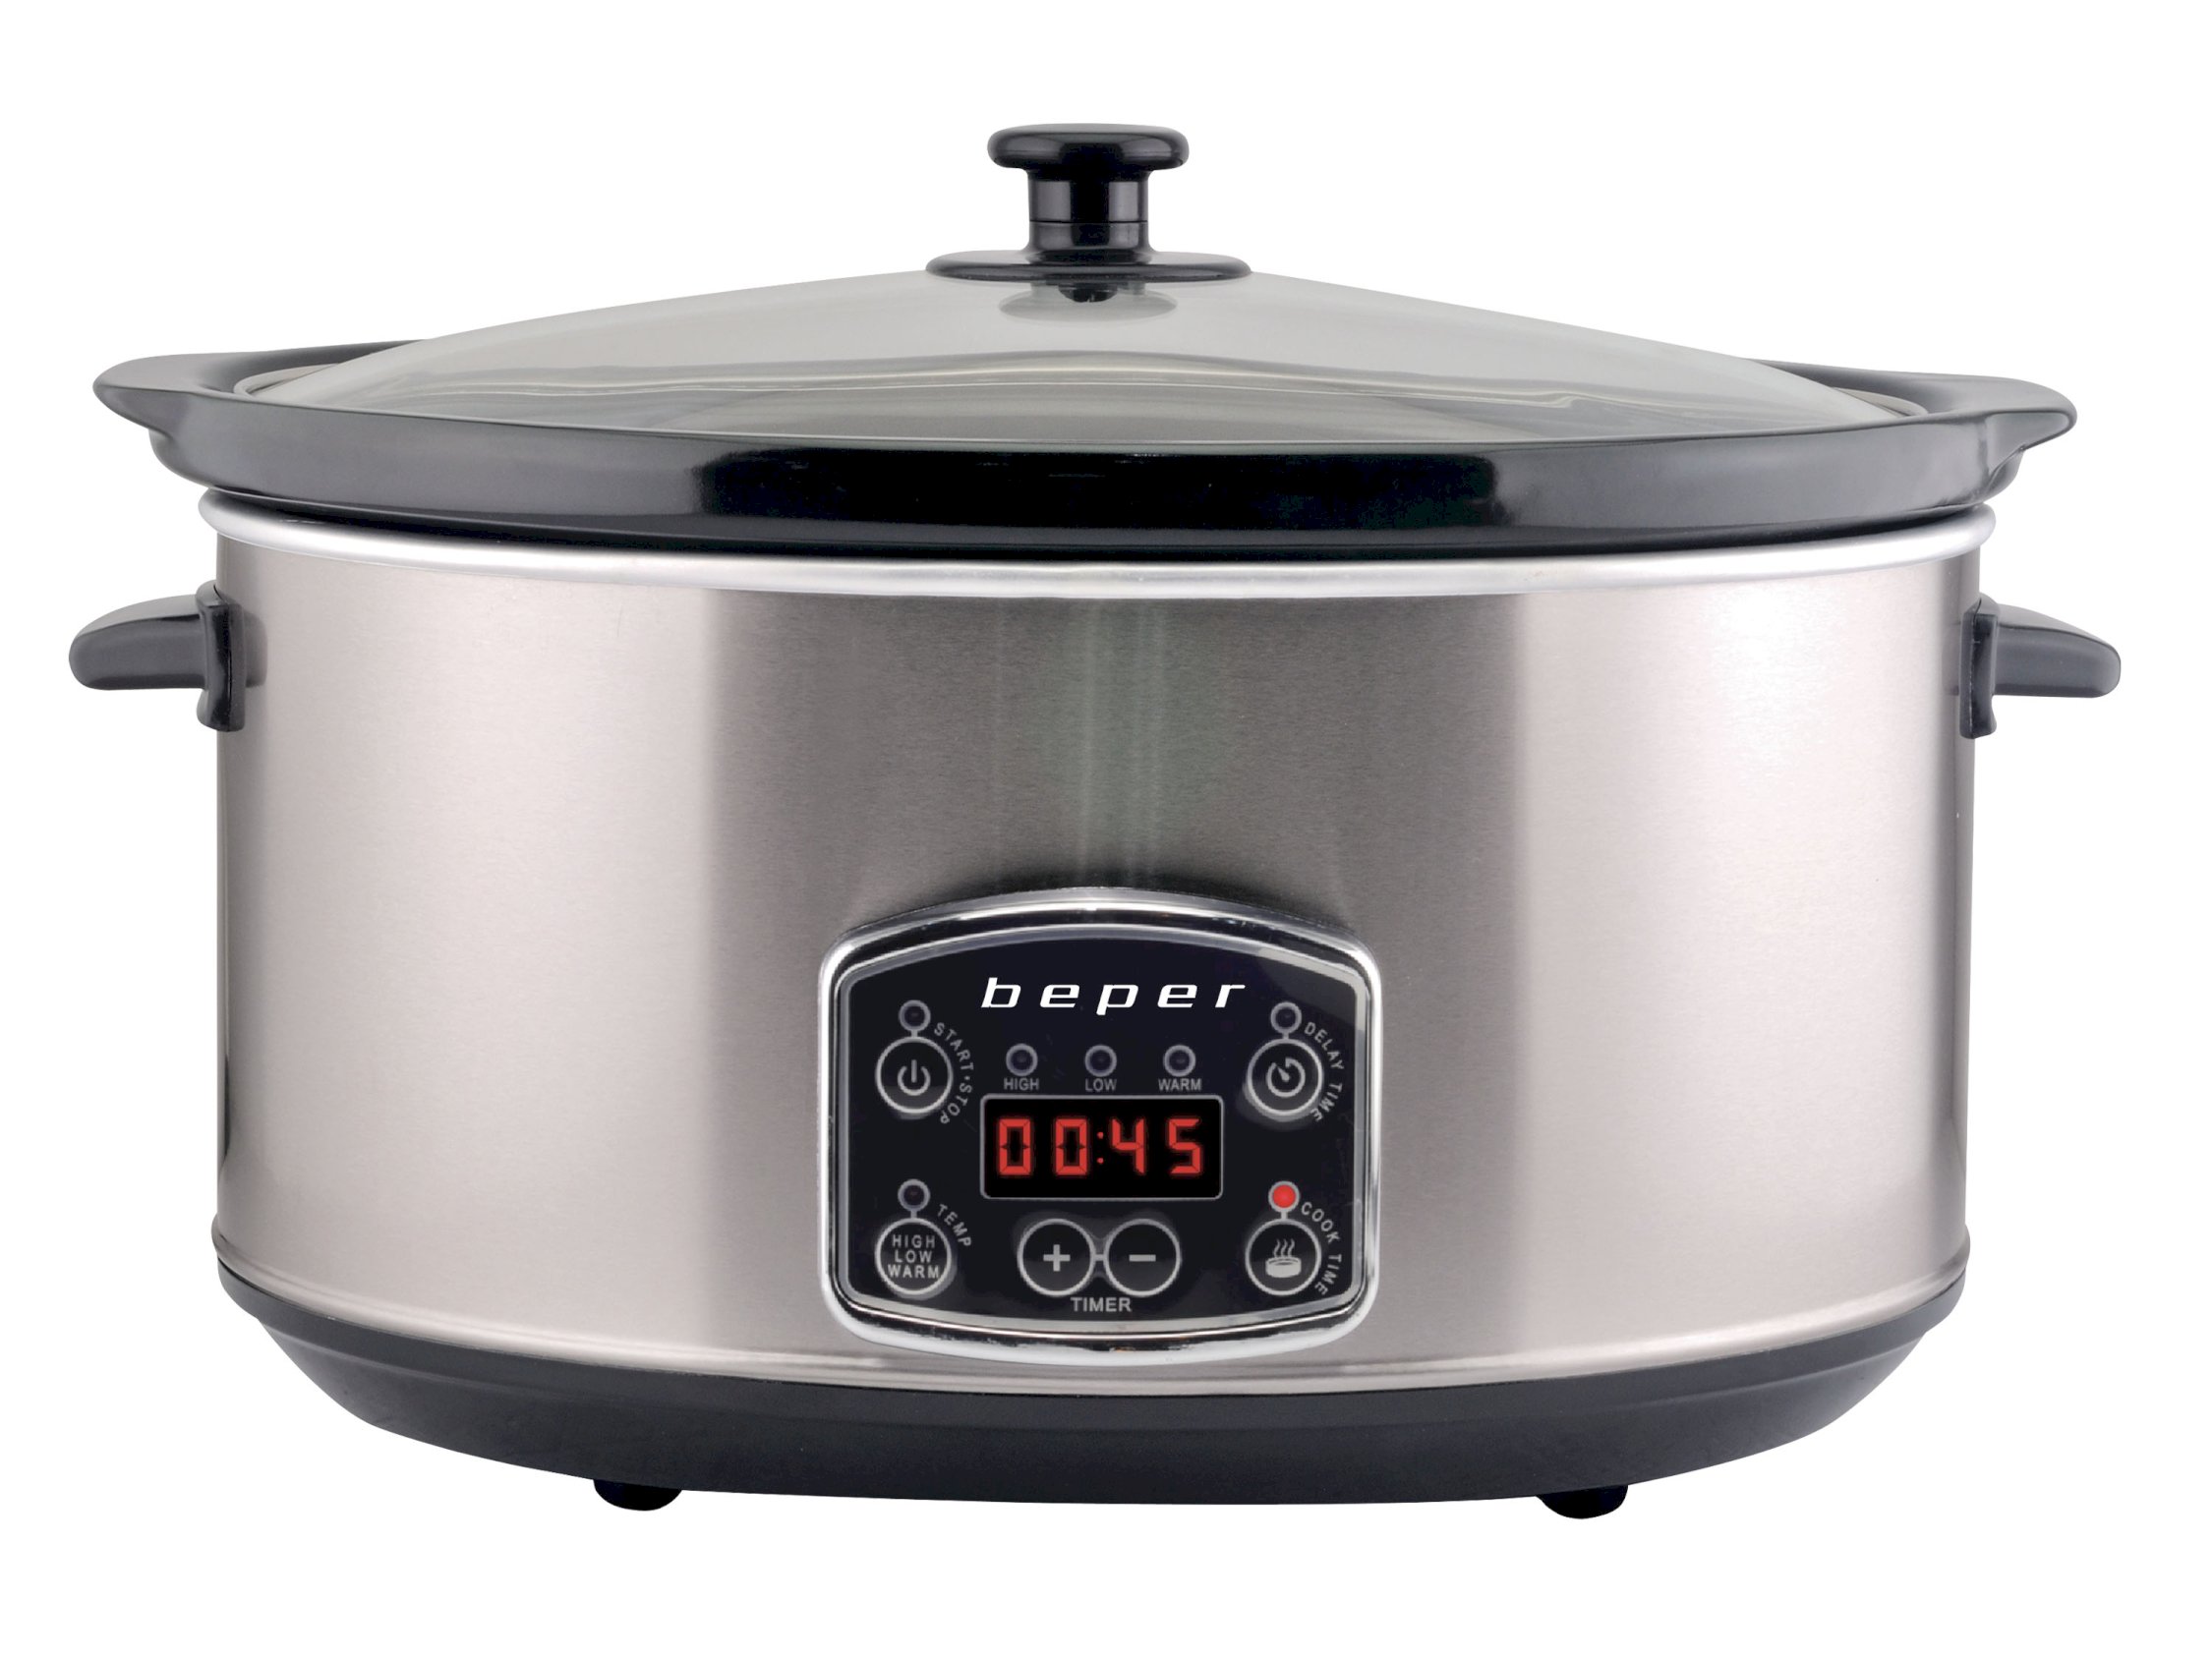 BC.510, digitale slowcooker, 280W, roestvrij staal